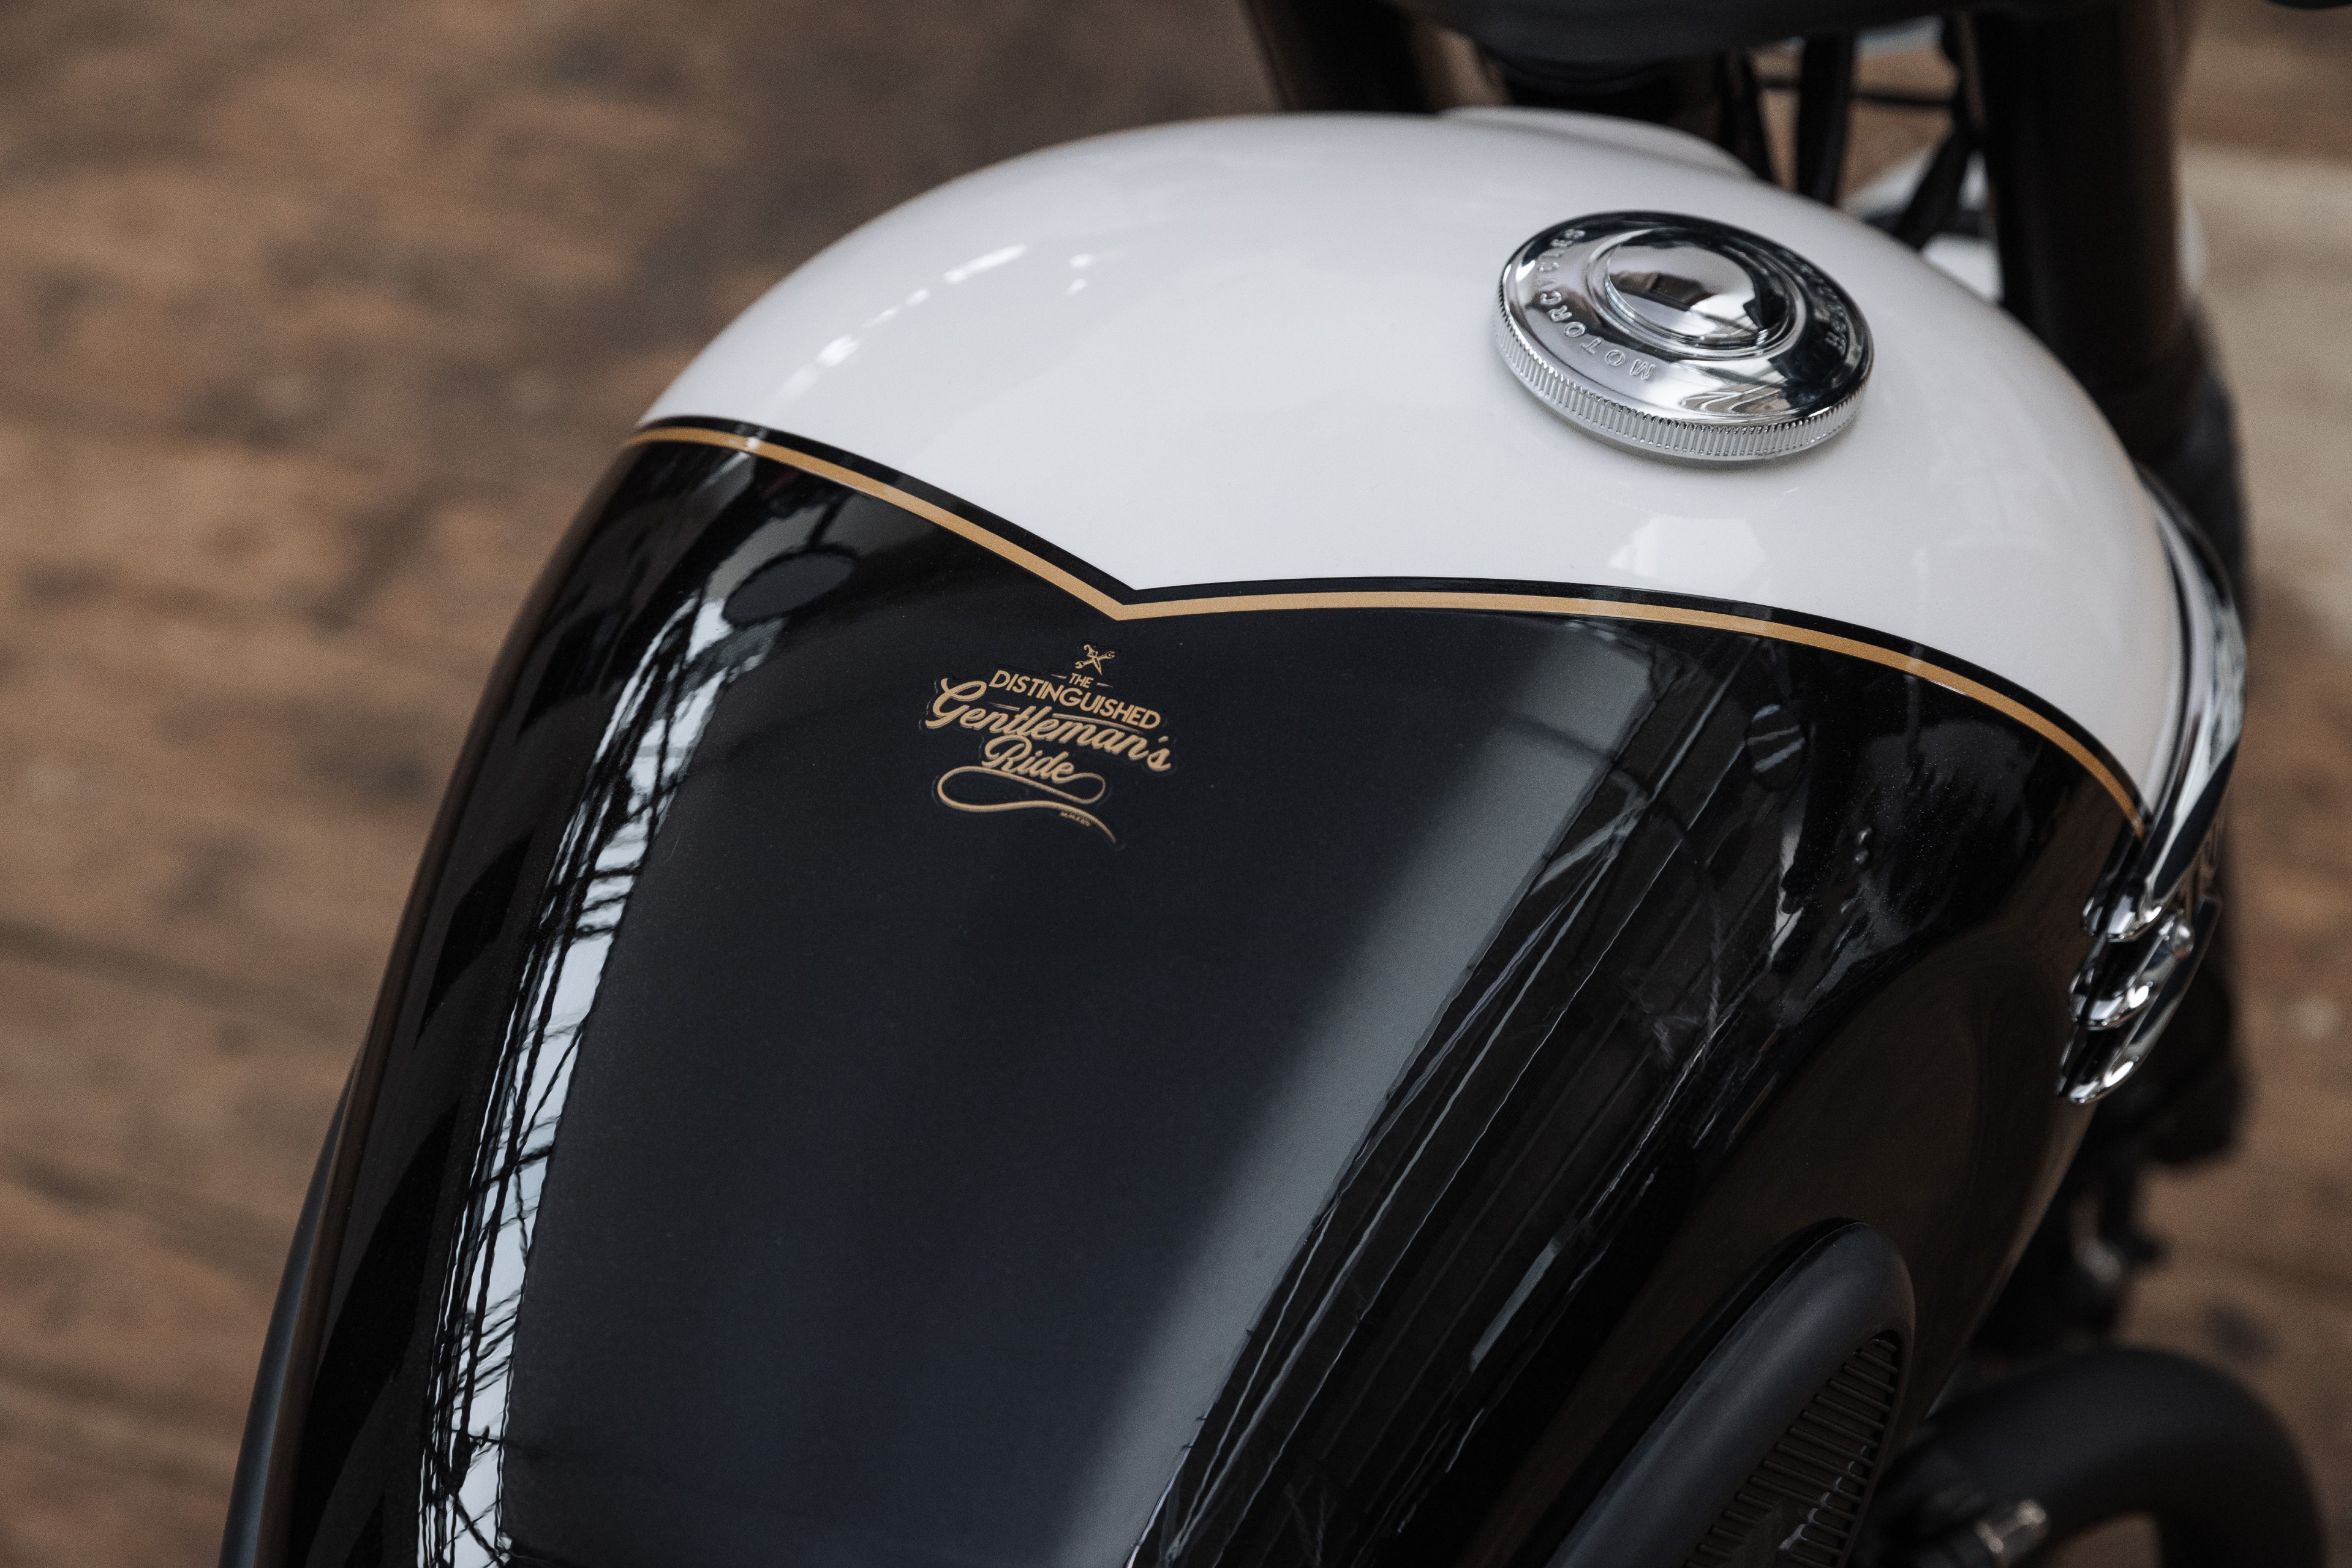 DGR script is finished in gold on the fuel tank 